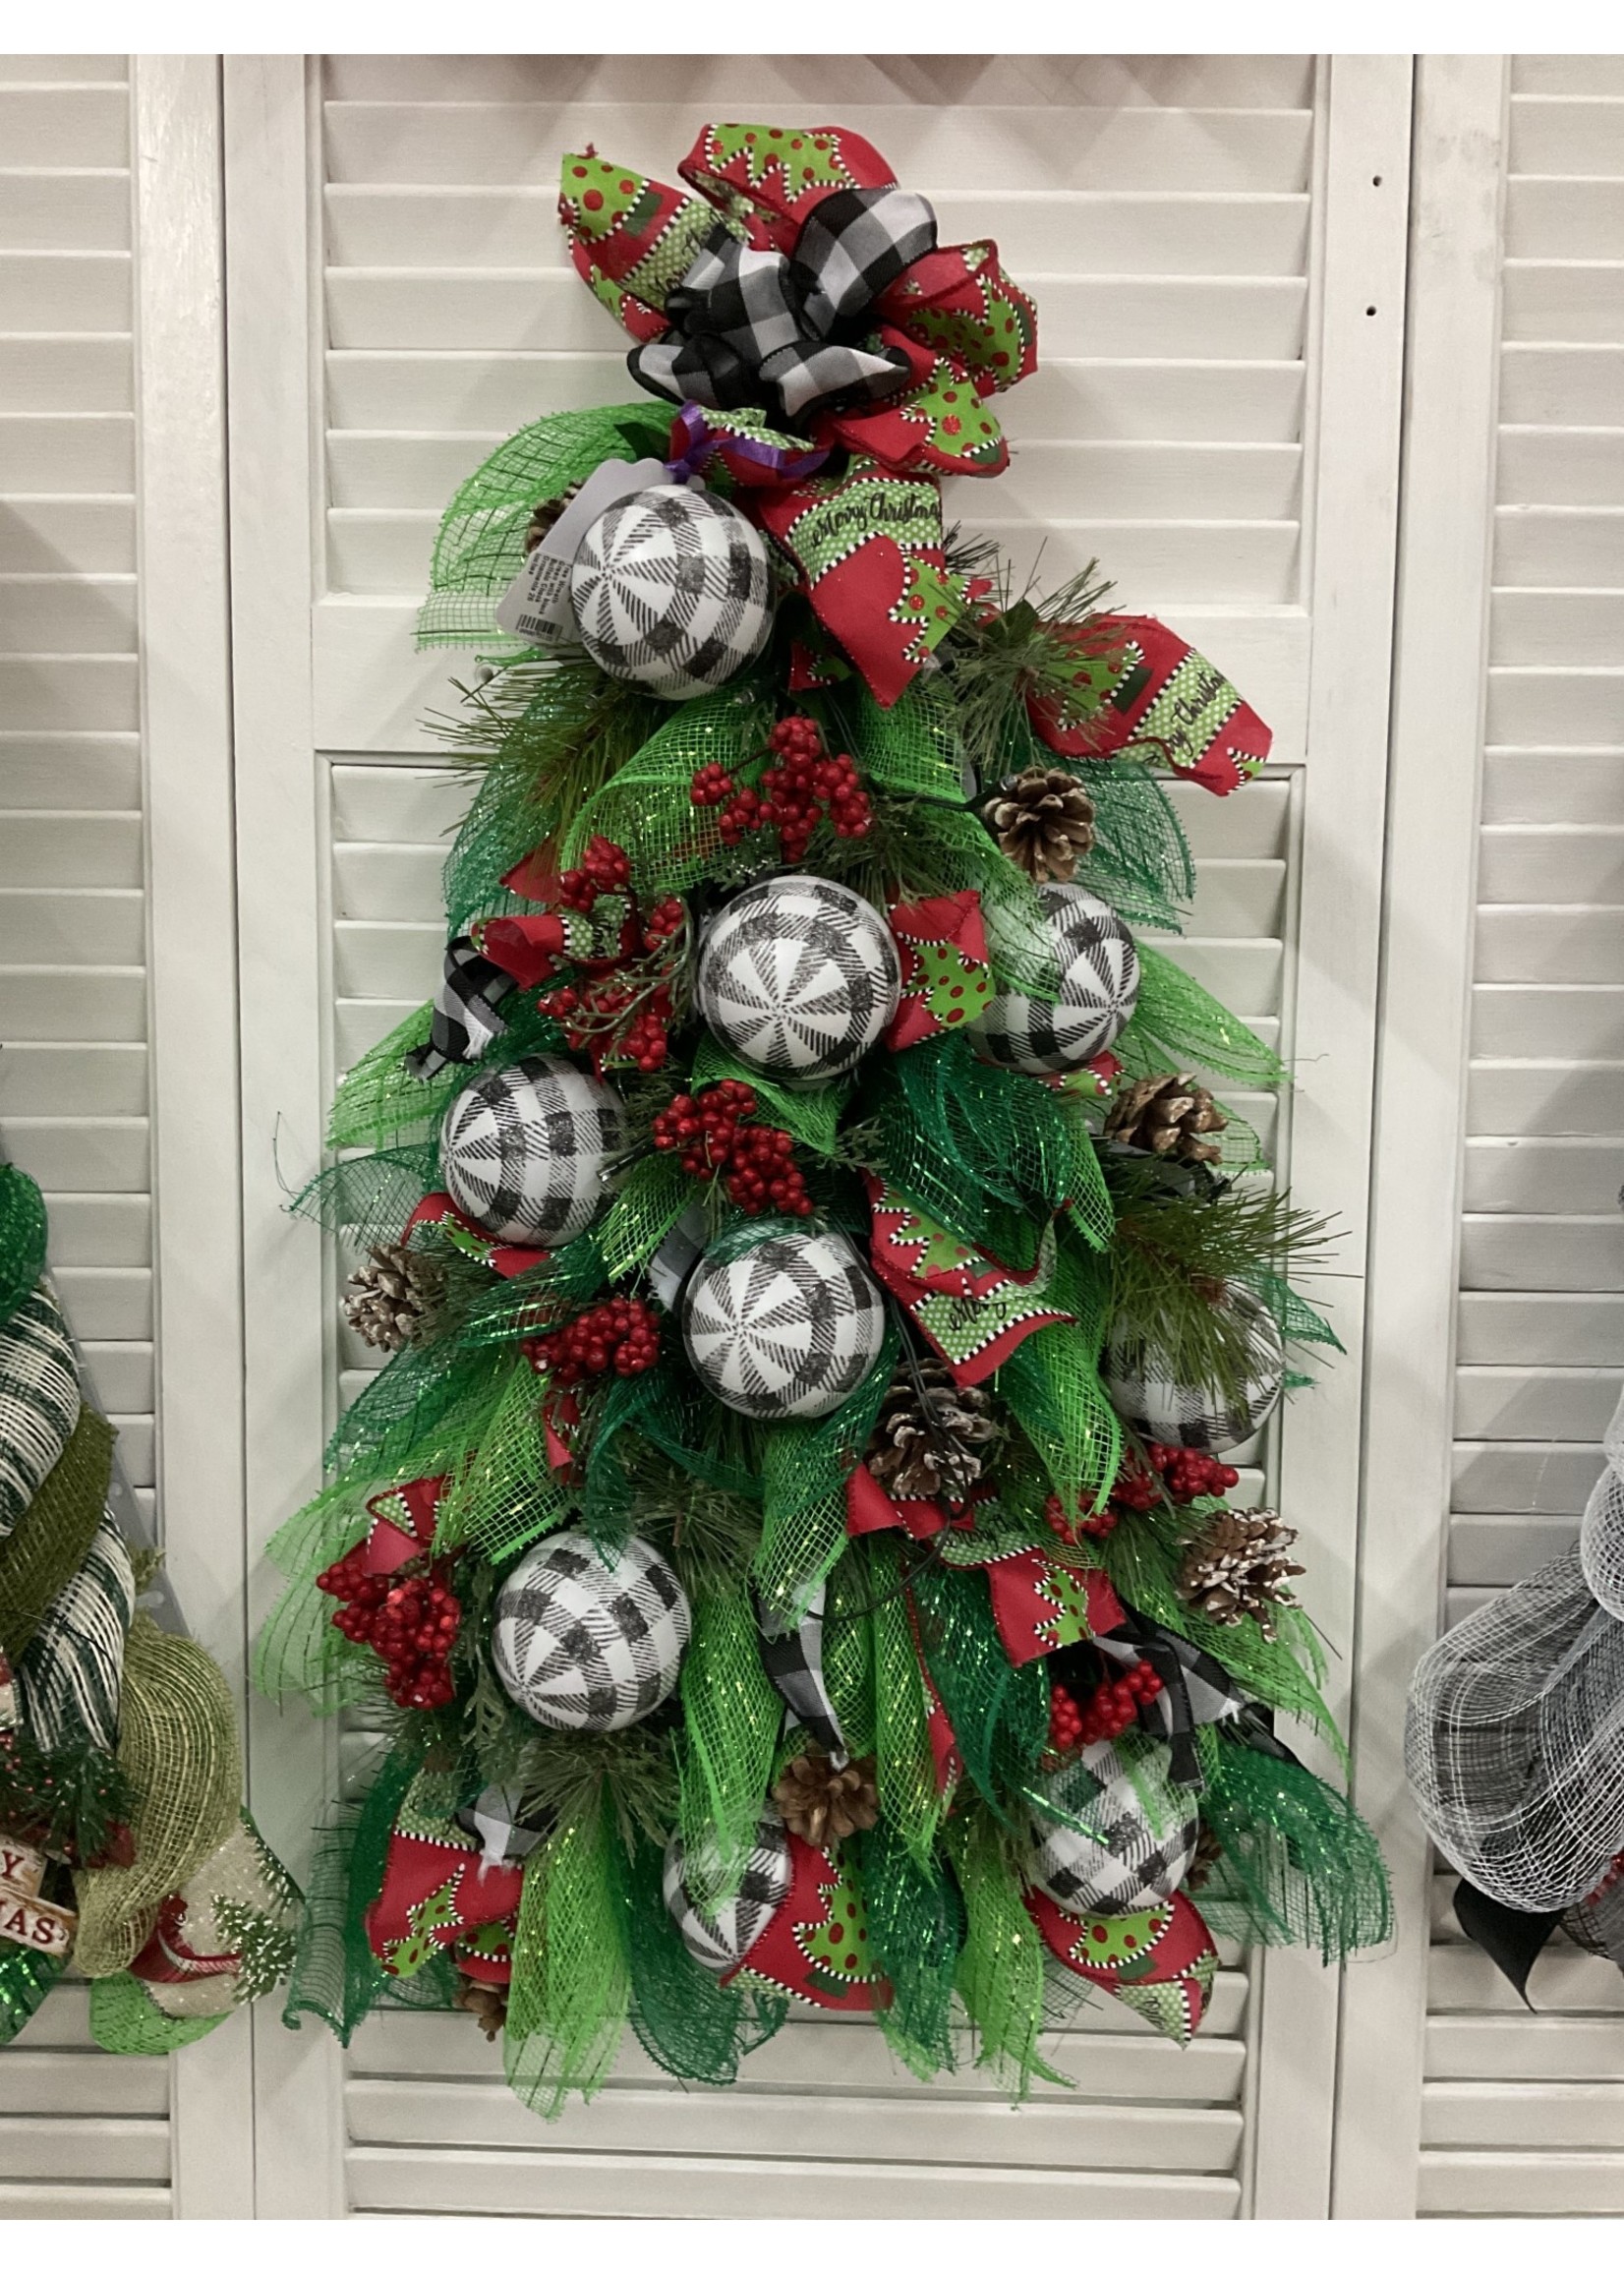 My New Favorite Thing Wreath Tree Green with Black Buffalo Check Ornaments 26 inches